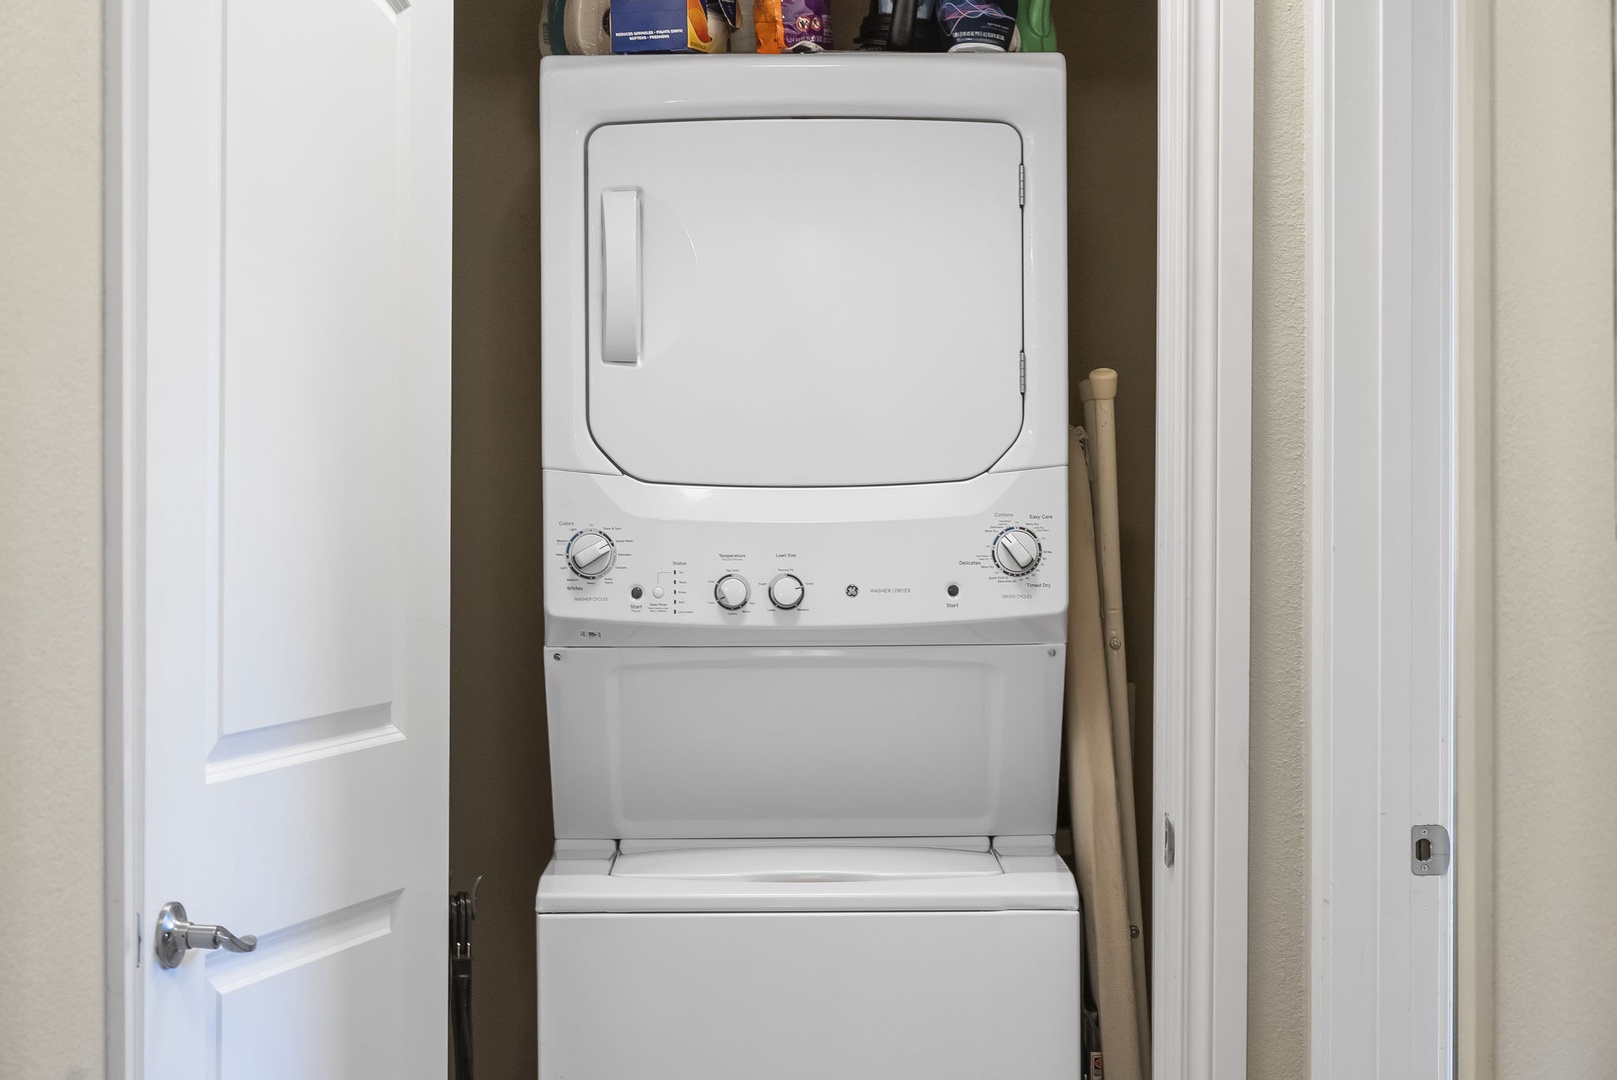 Stackable washer & dryer